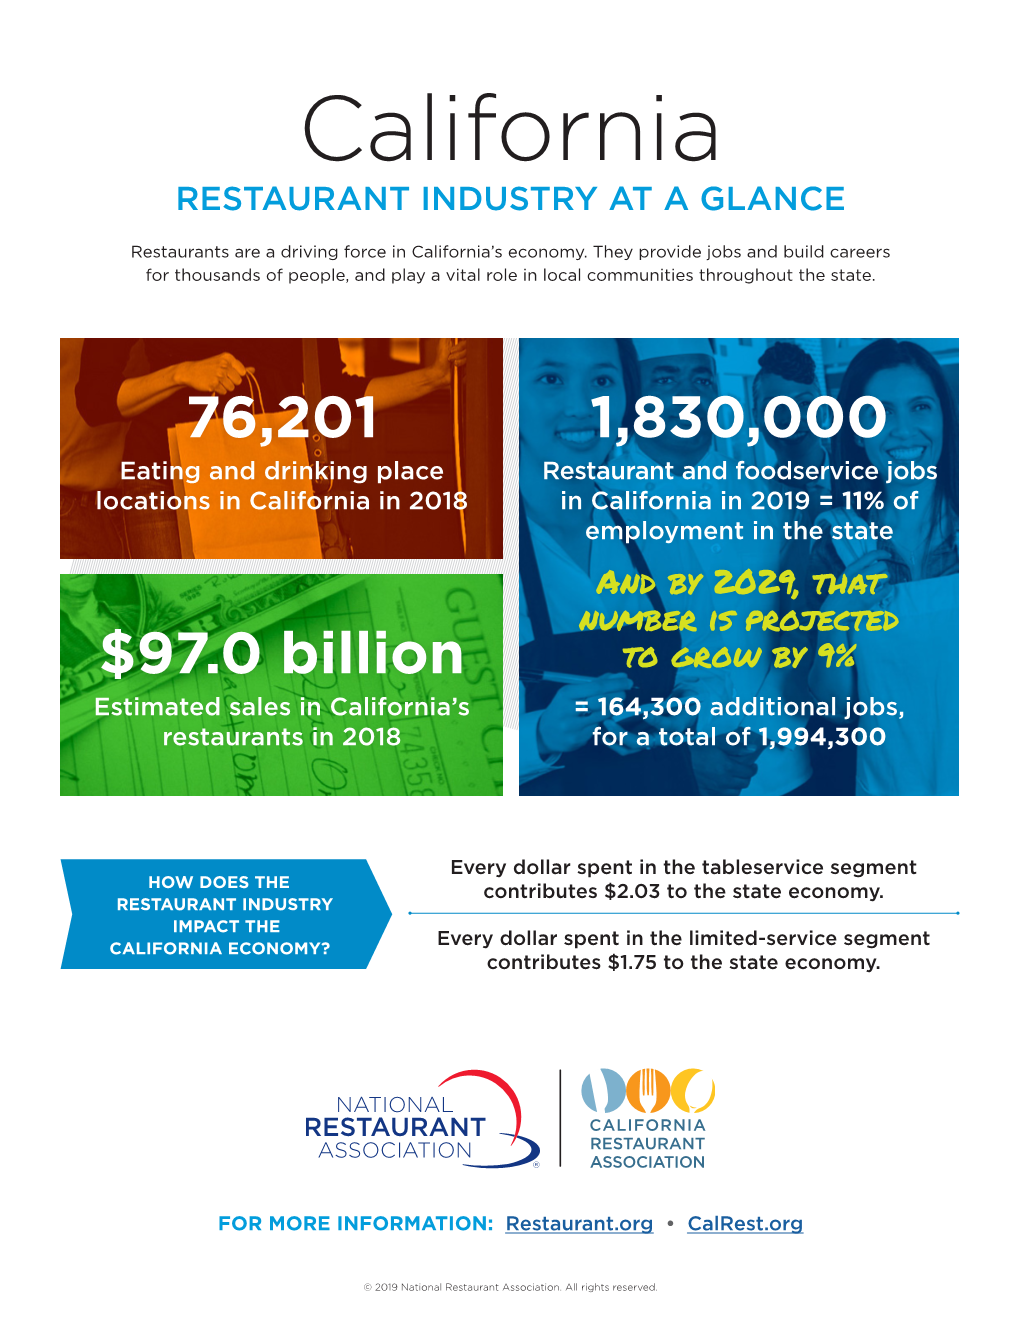 California RESTAURANT INDUSTRY at a GLANCE